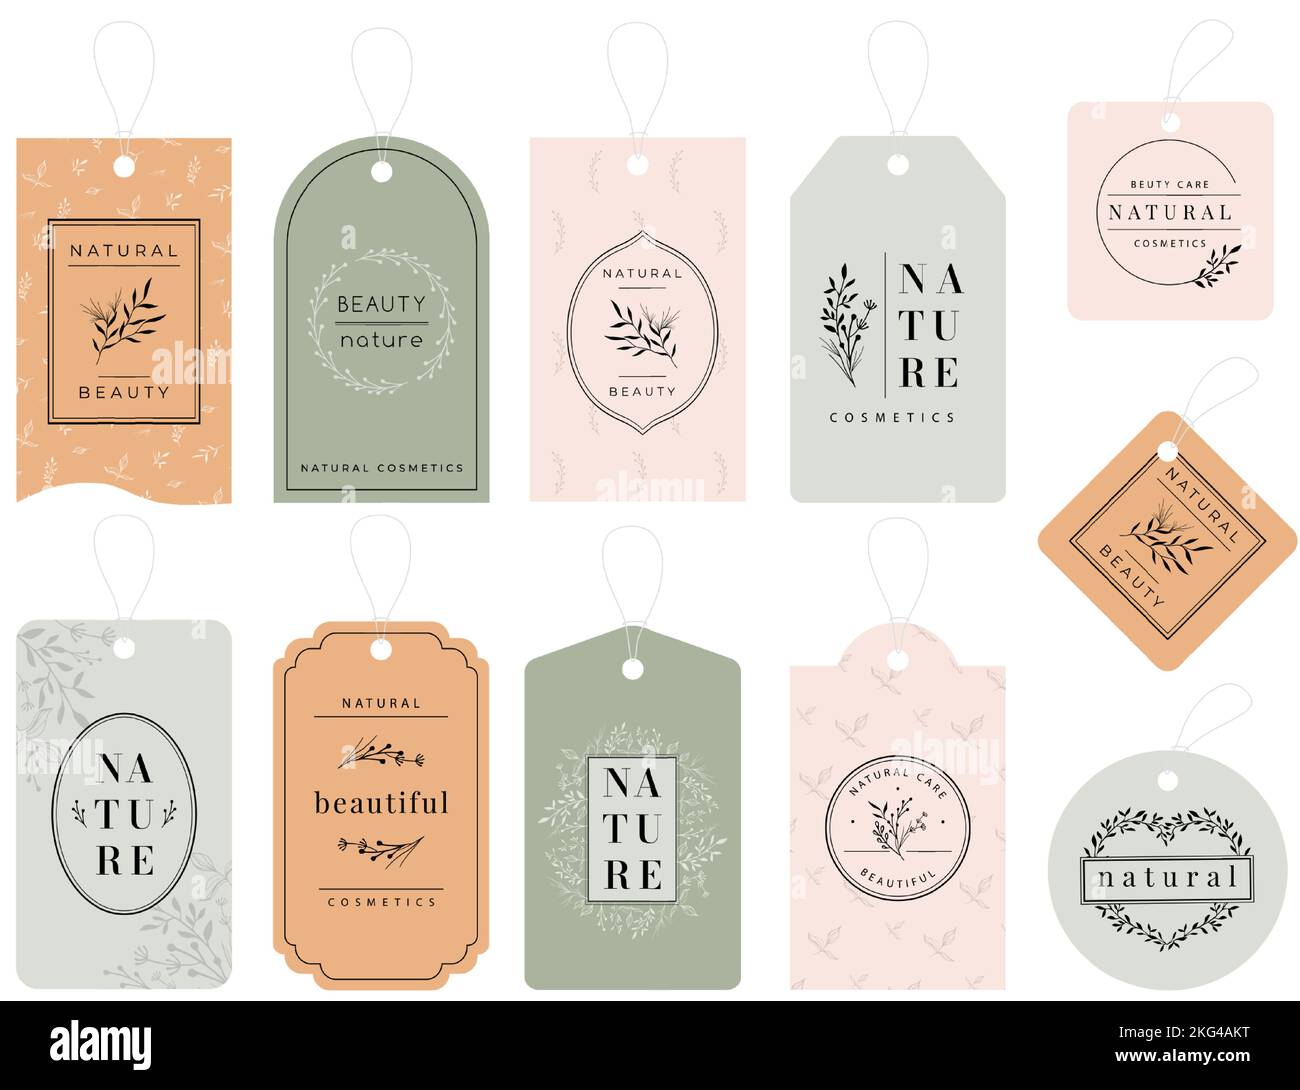 Beauty product tags. Vertical tag template with floral branches and leaves pattern for natural cosmetic products vector set Stock Vector